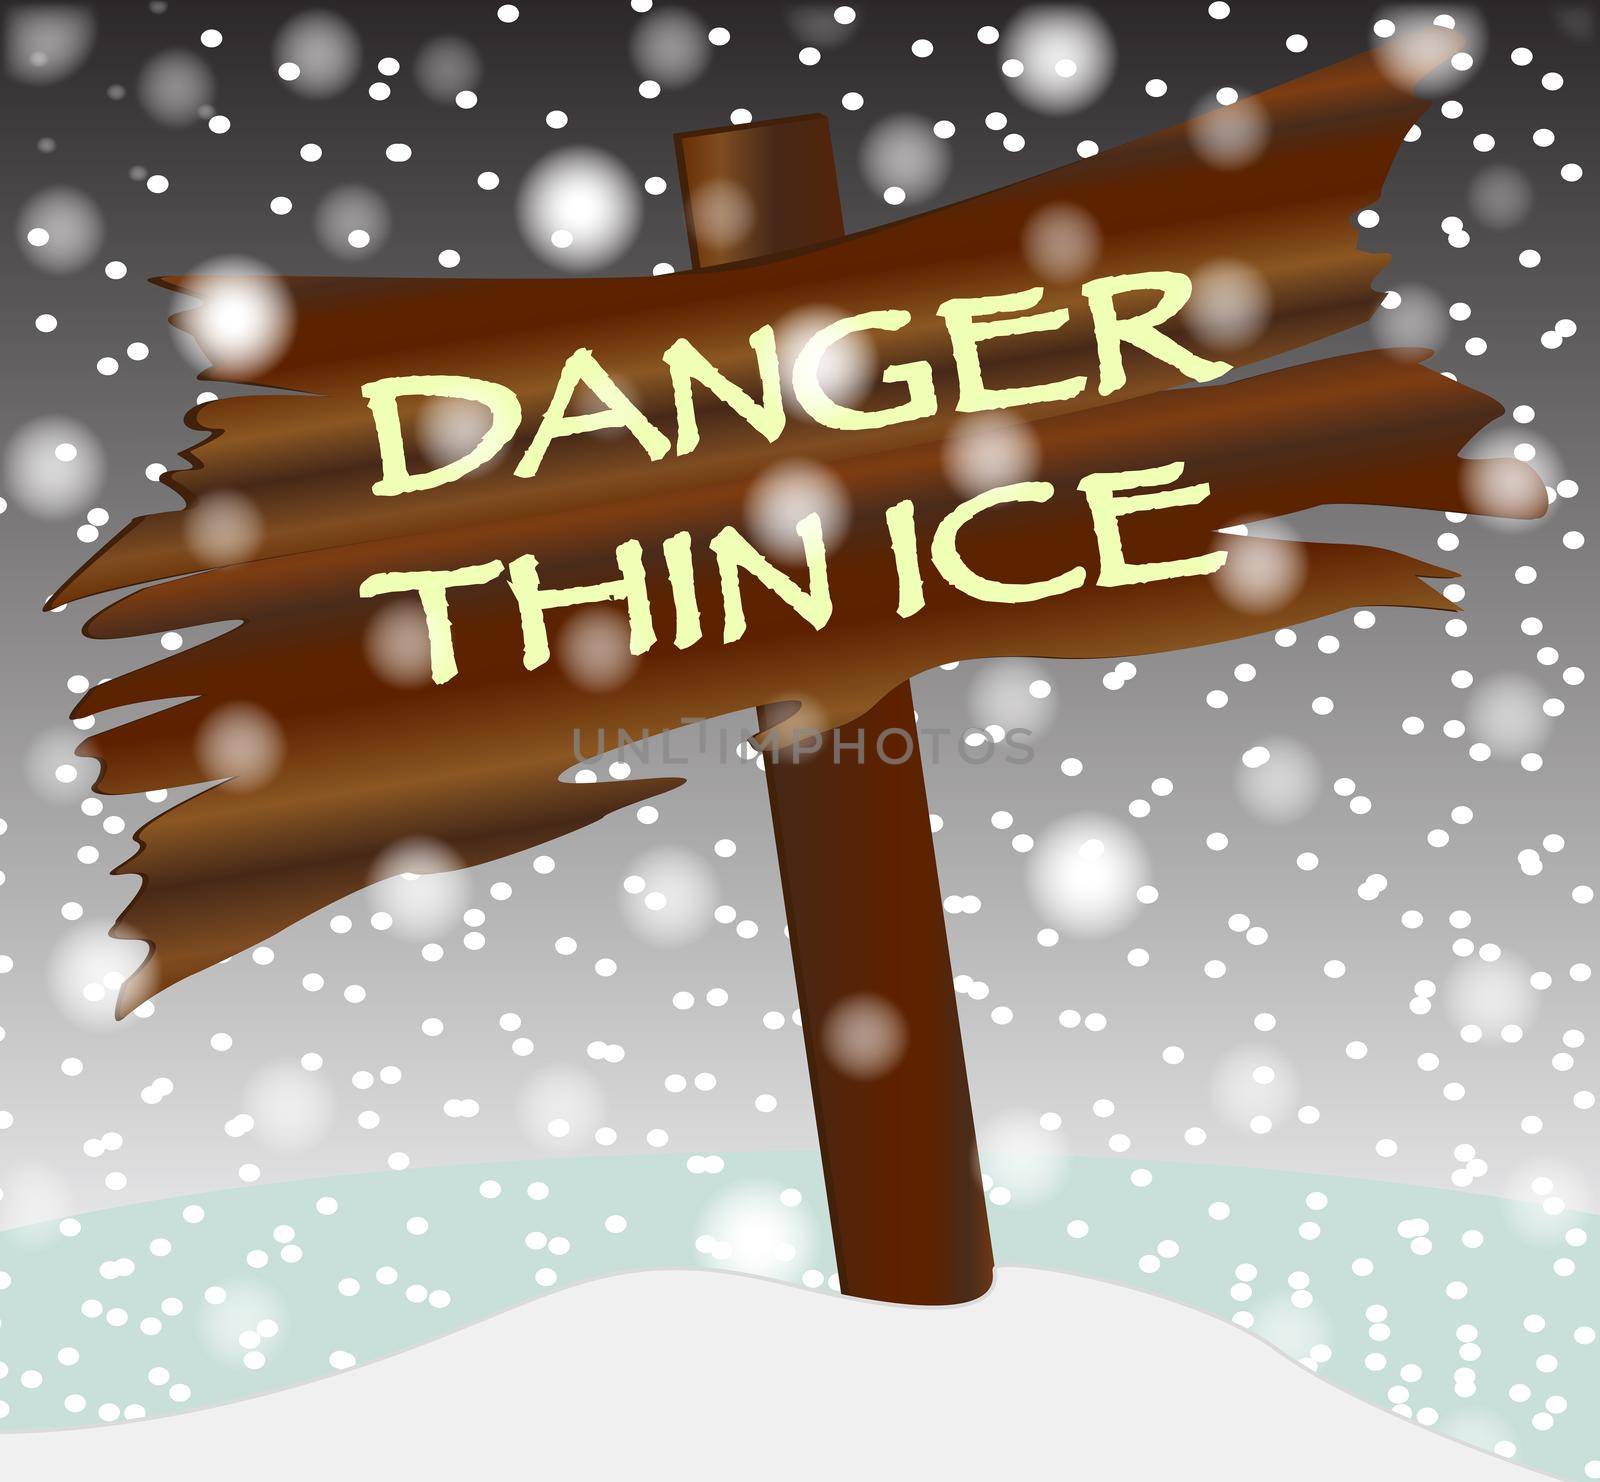 A wooden sign with the text Danger Thin Ice in a winter snowstorm